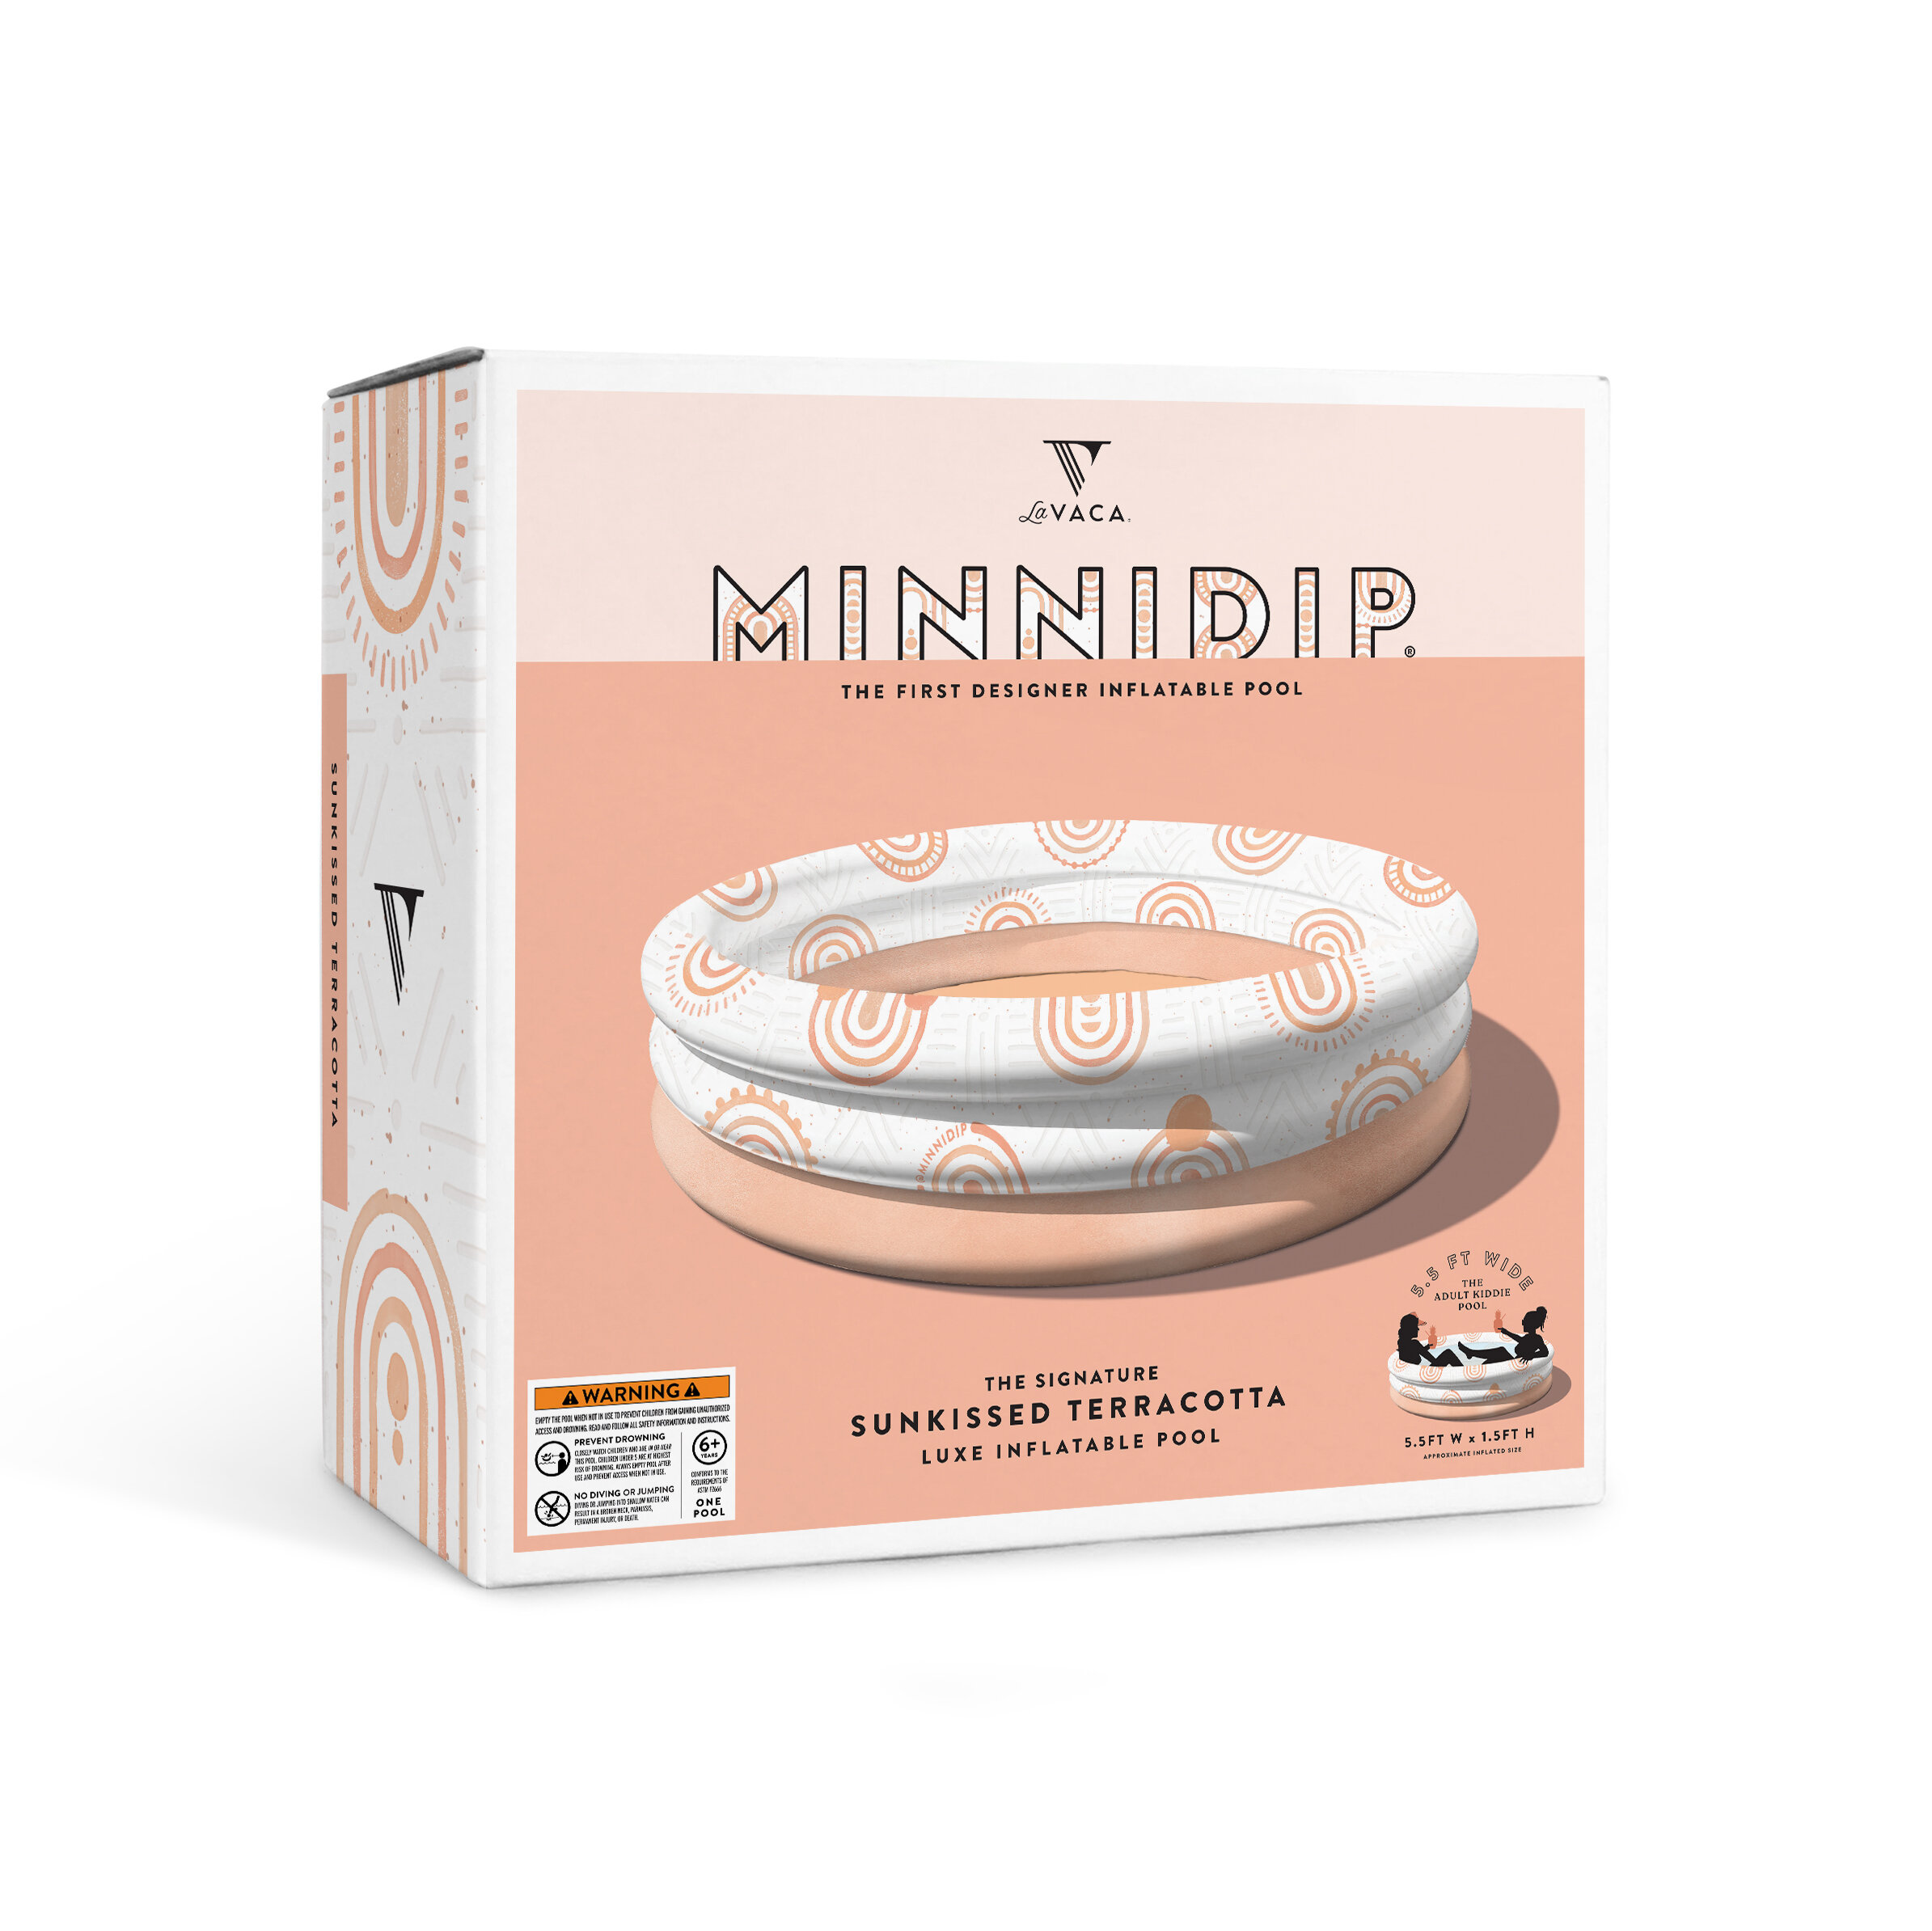 the SUNKISSED TERRACOTTA luxe inflatable pool — MINNIDIP LUXE 